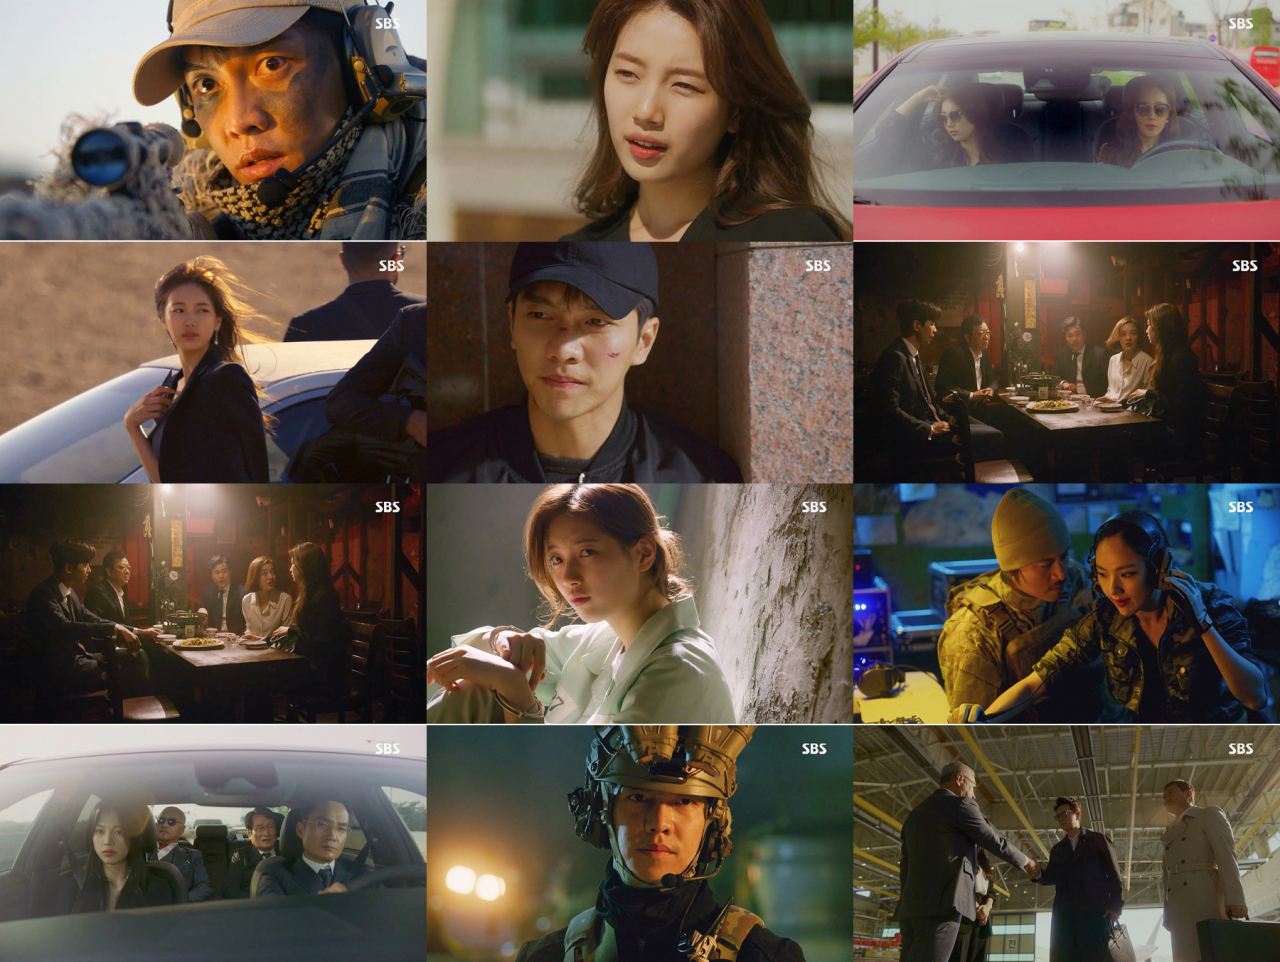 The final episode of the SBS gilt play Vagabond was a rather unfriendly ending, if not with Season 2 in mind: a vain ending where the case was not resolved.In the 16th episode of the last episode of Vagabond, which aired on the 23rd, Cha Dal-gun (Lee Seung-gi), who had been almost burned by Prince Edward Island Park, managed to save his life and became a mercenary at the end of twists and turns, and Ko Hae-ri (Bae Su-ji), who was saddened to believe that Dal-gun died It was drawn to become a lobbyist with the help of Jessica Lee (Moon Jung-hee).At the end of the play, Dalgan, who was waiting in the desert of Kiria, North Africa, was shocked to know that his target was Harry, a lobbyist.Soon another mercenary tried to shoot her, and in a moment he pulled the trigger at the mercenary and Drama was over.This scene was followed by the first scene once, and there was no feeling other than the meaning of the Sumi Correlation finale.After the fact that the actor who coordinated the prime minister Hong Soon-jo (Moon Sung-geun), who impeached President Chung Kook-pyo (Baek Un-sik), revealed in the 15th, and Samael, who reigned over all evil forces, was not different but the lobbyist Prince Edward Island-young, the head of the Dynamic KP, Nothing was solved.In response, Kim Kyung-kyu, the team leader of Celltrion Entertainment, said in a telephone conversation with the company on the 24th, I originally planned to have Season 2 in mind and the writer was connected to it, and I finished with this story as the production period got longer. The story should be solved in Season 2, but Season 2 has many problems to solve, such as casting of season 1 performers.Nothing has been confirmed yet.Vagabond is a substantive action that uncovers a huge national corruption found in a concealed truth by a man involved in a civil-commodity passenger plane crash.Spectacle scenes such as big scale bold action (shooting battle and chase) that Drama has not tried so far have given even more fun to the storytelling that has been frothing to money, power, weapons (defense industry) capital.However, Season 1 ending is a service for viewers to recover a little more rice cake that has been made in the meantime.Even if Season 2 is foreseen, such consideration is necessary, but if it is not confirmed in Season 2 in the fast-paced production of drama and consumption ecosystem, I think it is even more so.